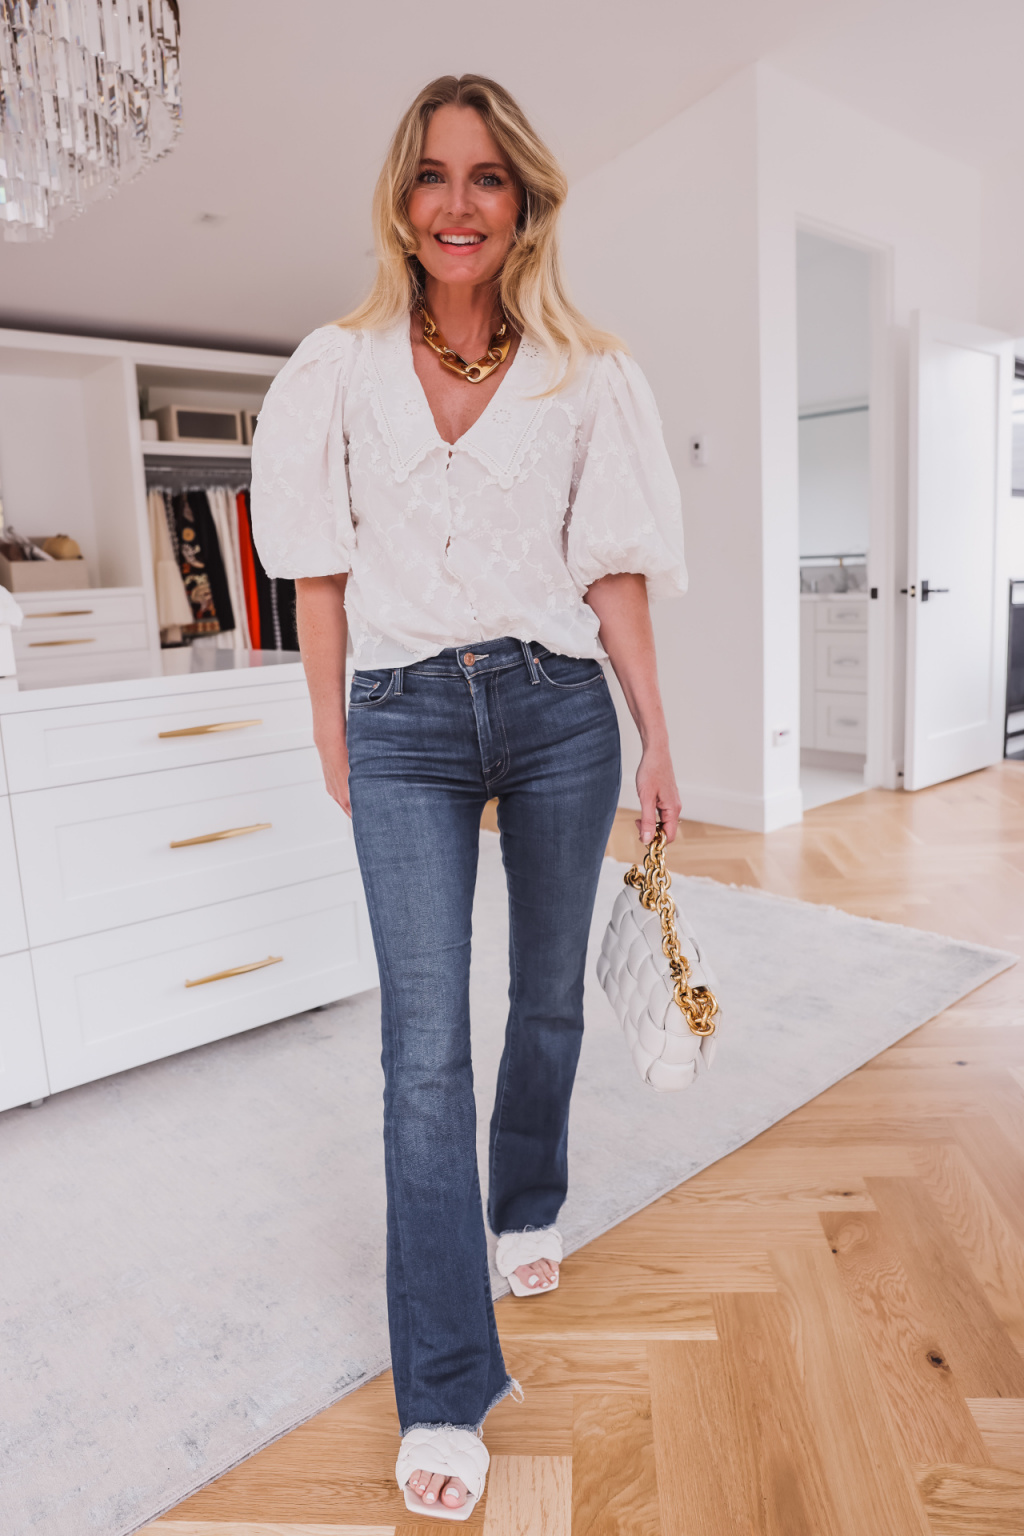 Denim Trends | 5 Popular Jean Trends | Fashion Over 40 | Busbee Style